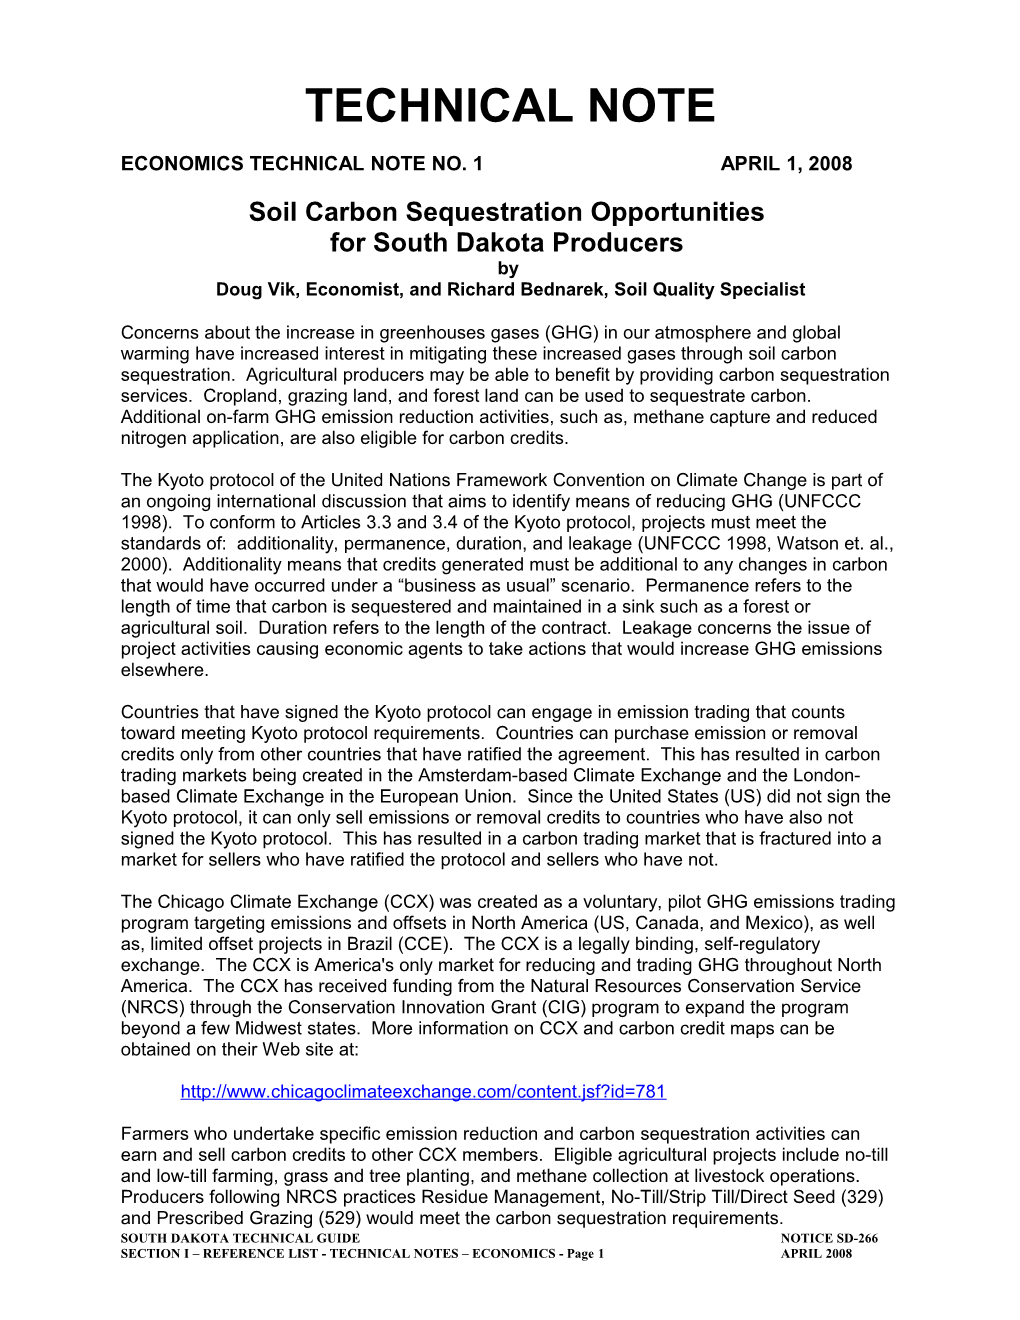 Soil Carbon Sequestration Opportunities